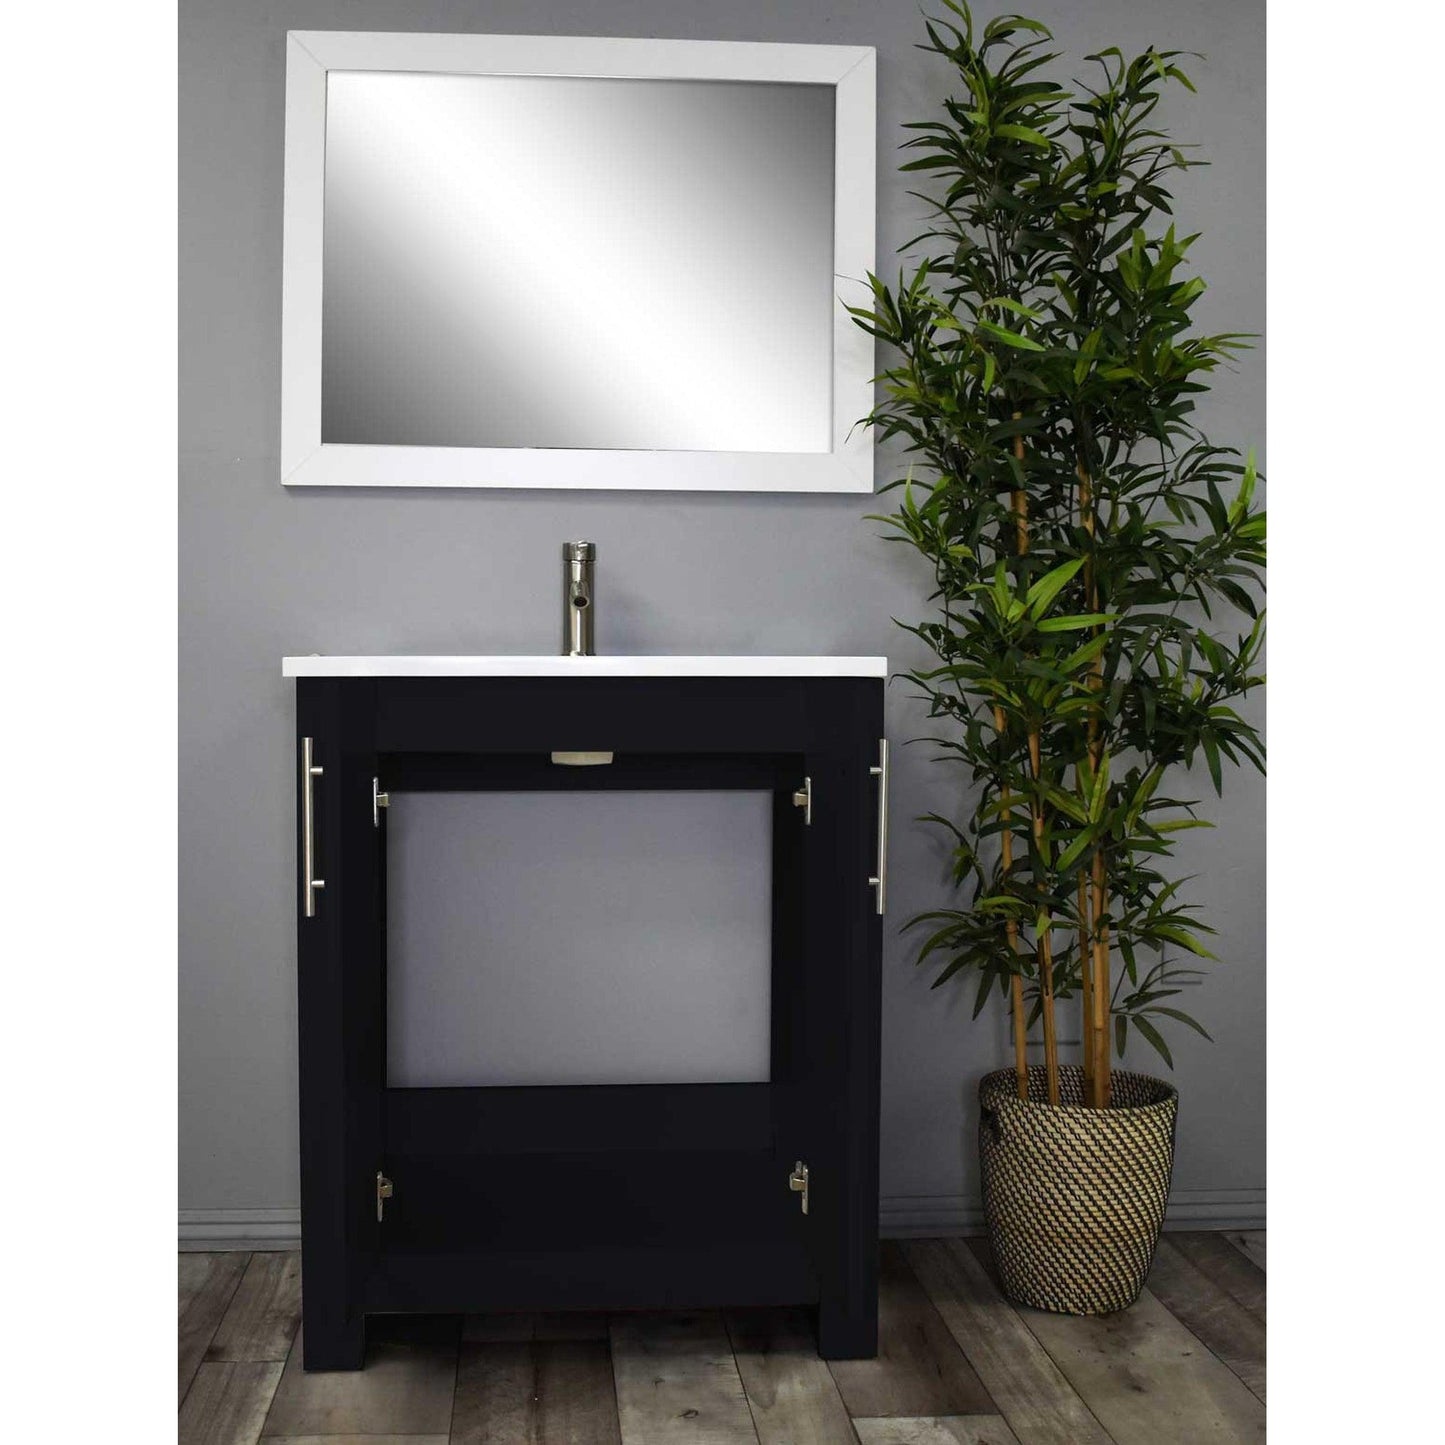 Volpa USA Austin 24" x 20" Glossy Black Modern Freestanding Bathroom Vanity With Acrylic Top, Integrated Acrylic Sink And Brushed Nickel Handles